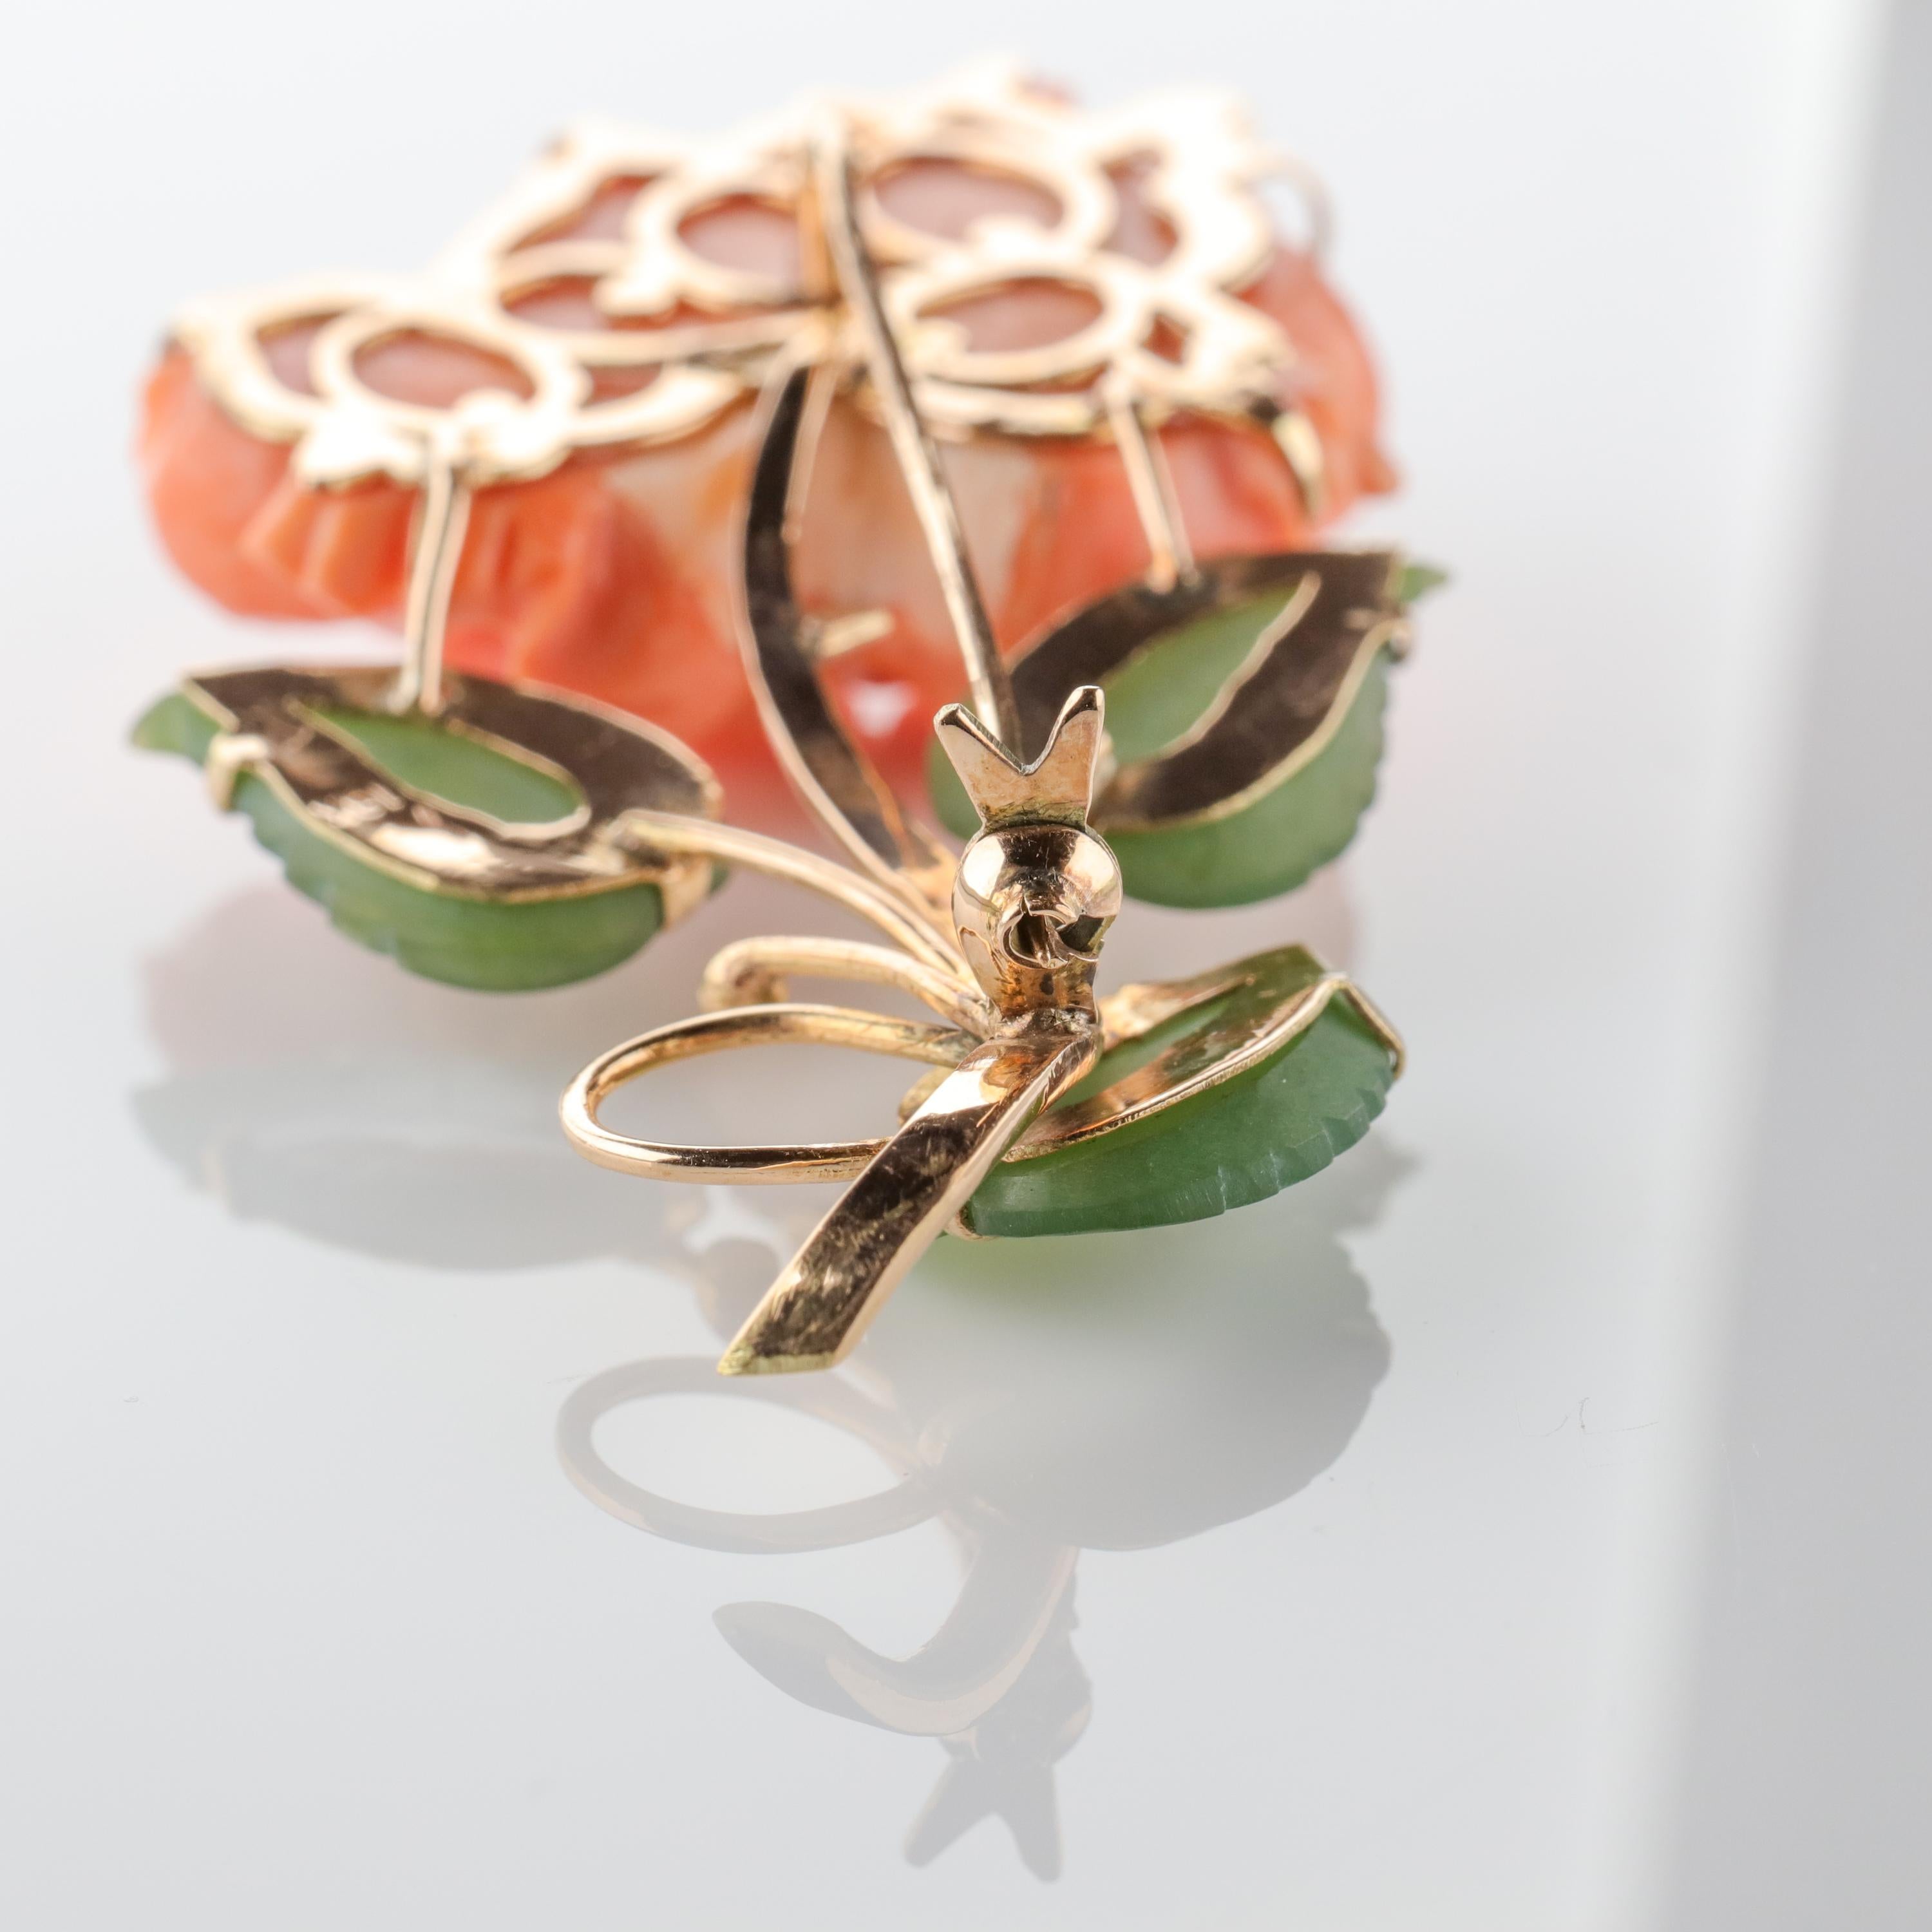 Uncut Brooch of Coral and Jade Depicting Chrysanthemum Blossom and Leaves